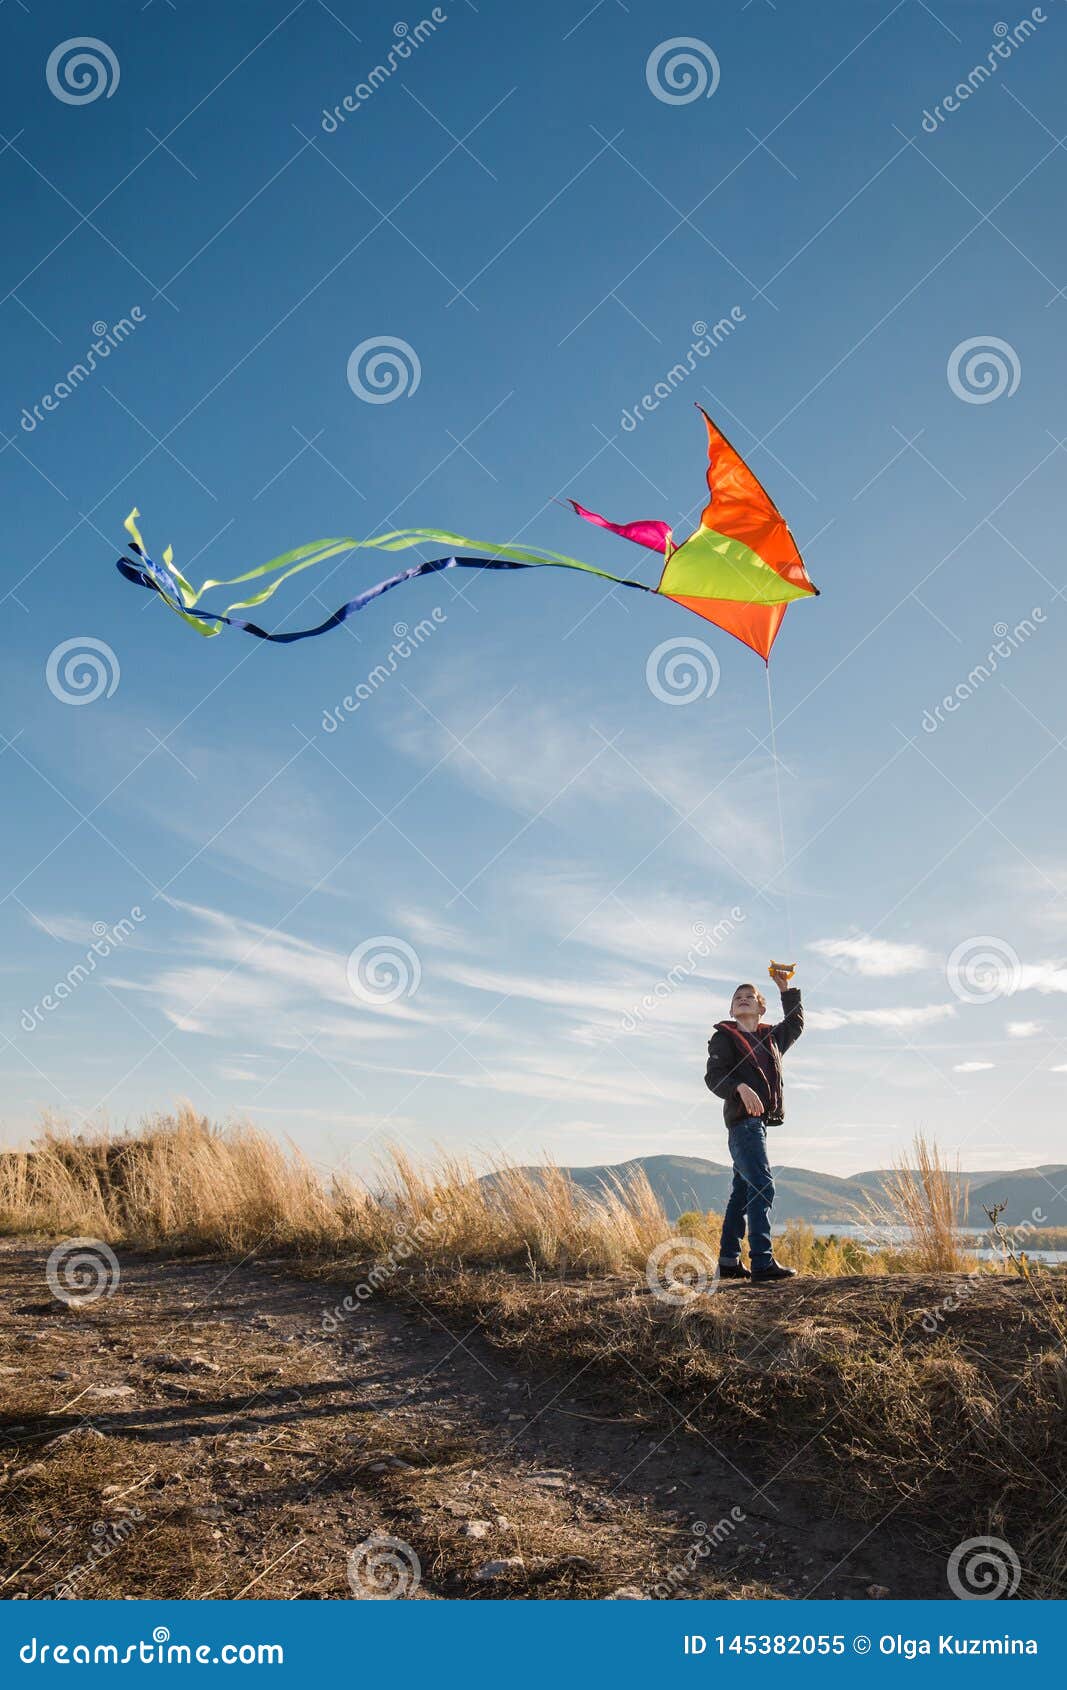 A Boy of 10 Years Old with a Kite Against the Sky. Bright Sunny Day ...